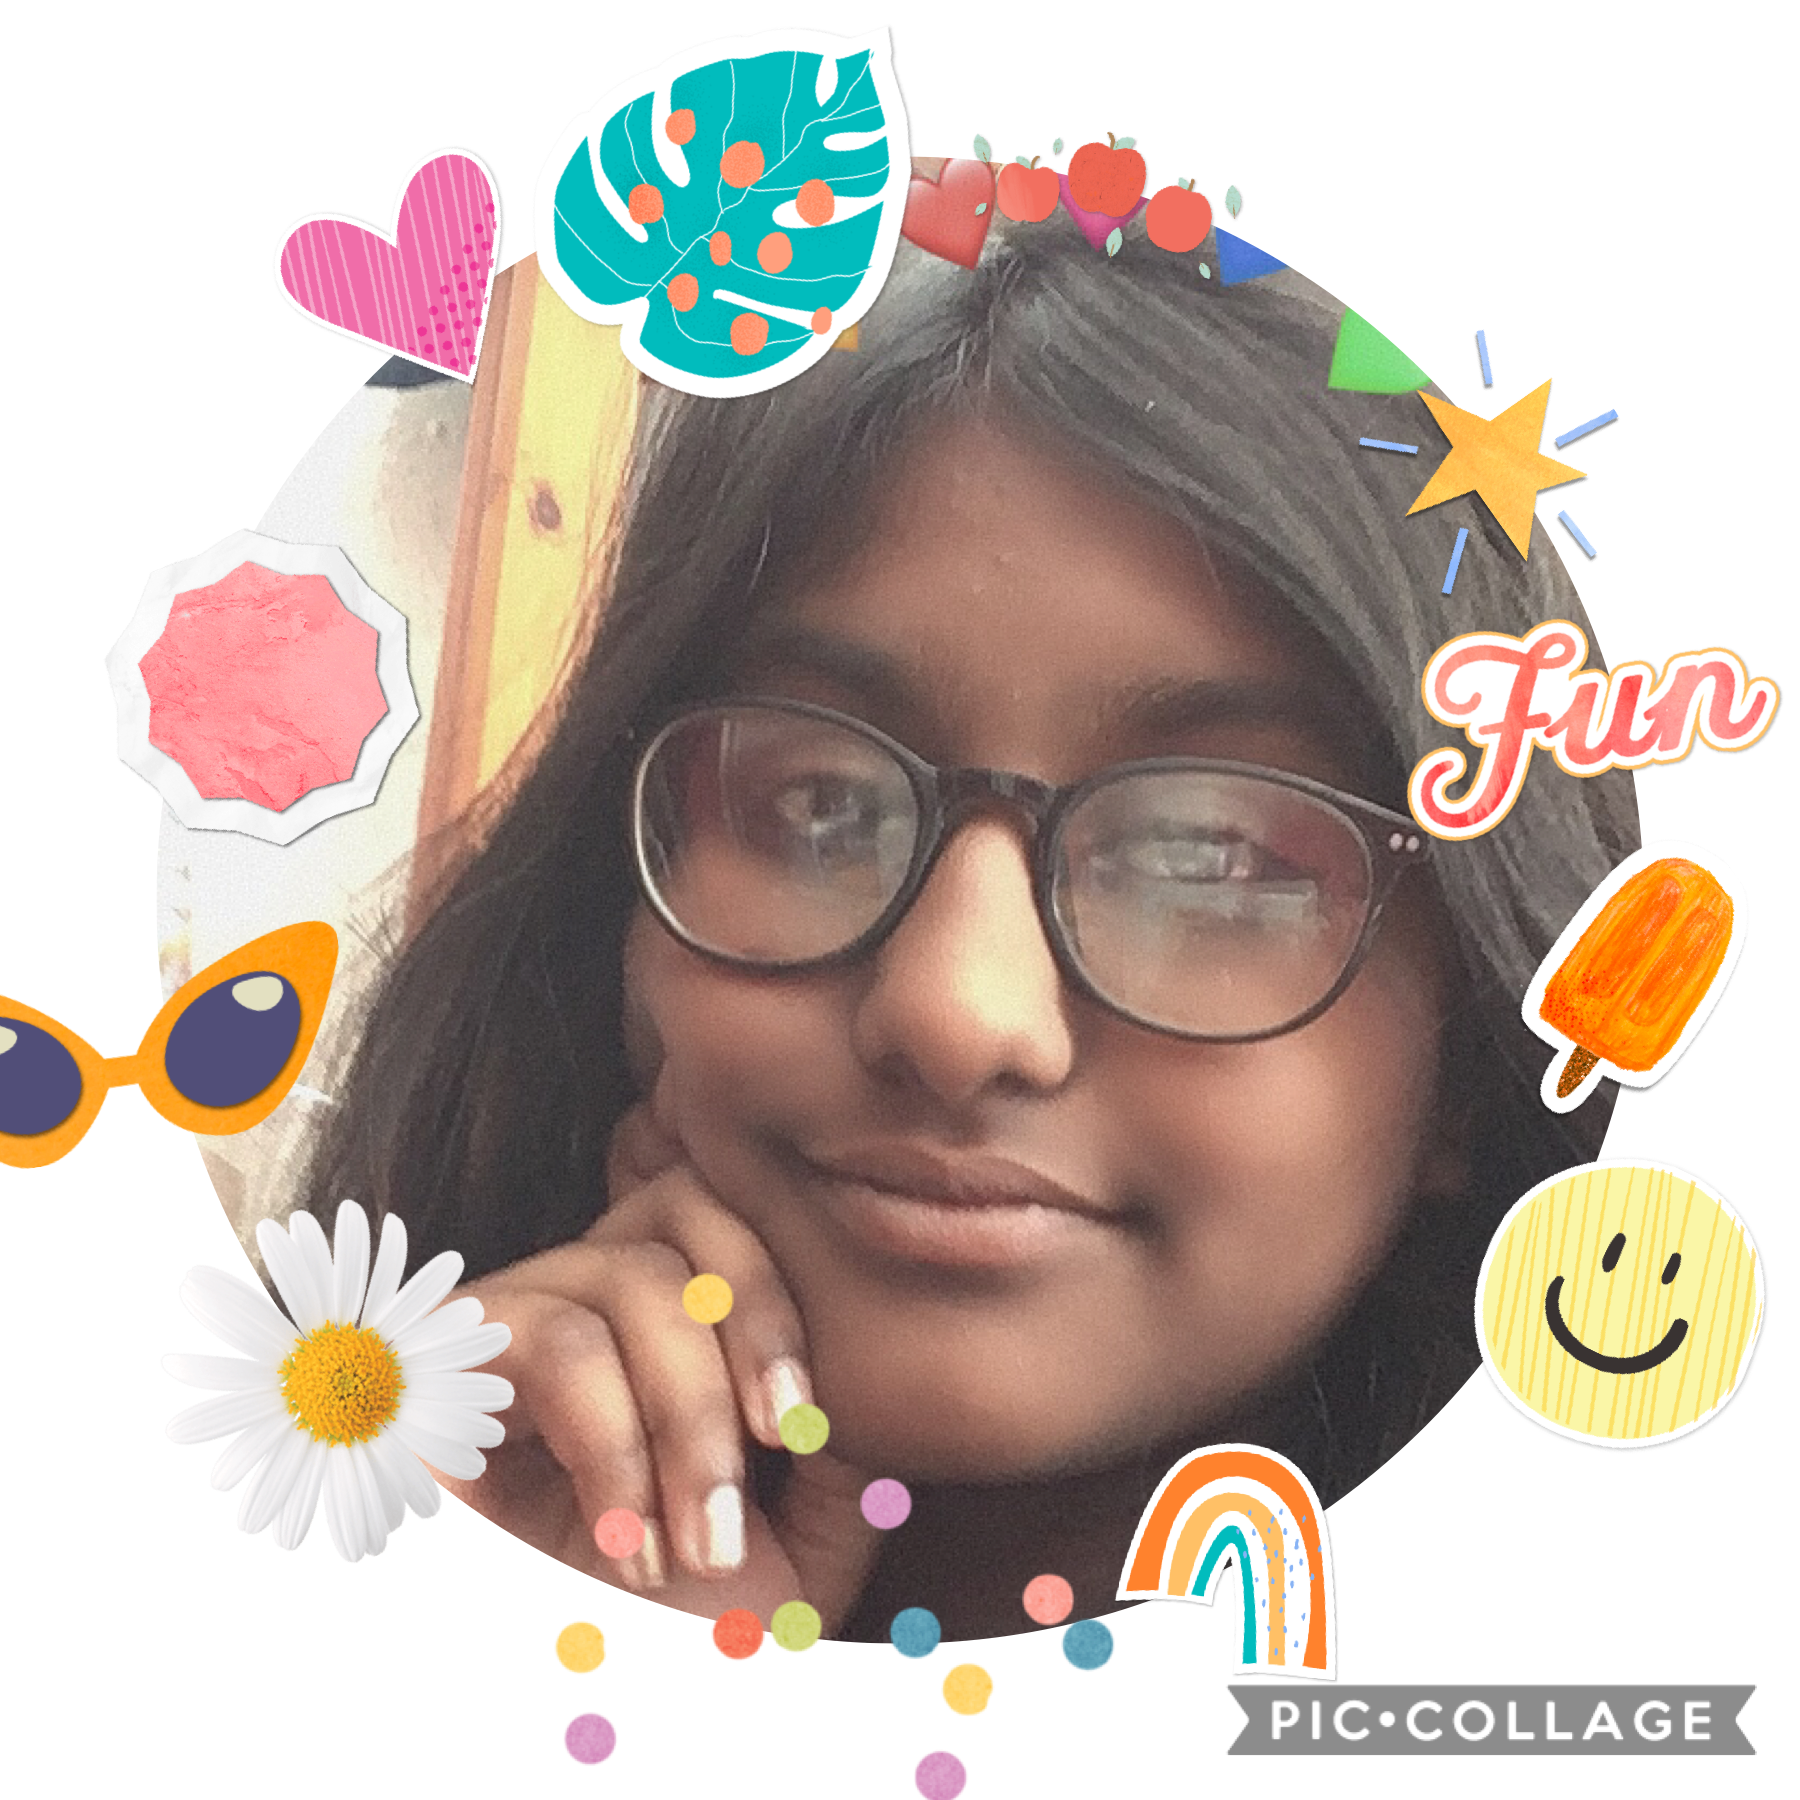 I’m. Not the best at edits but I’m kind of new to this system so yea.. But I hope I can edit some of my followers pics to make some cool designs!